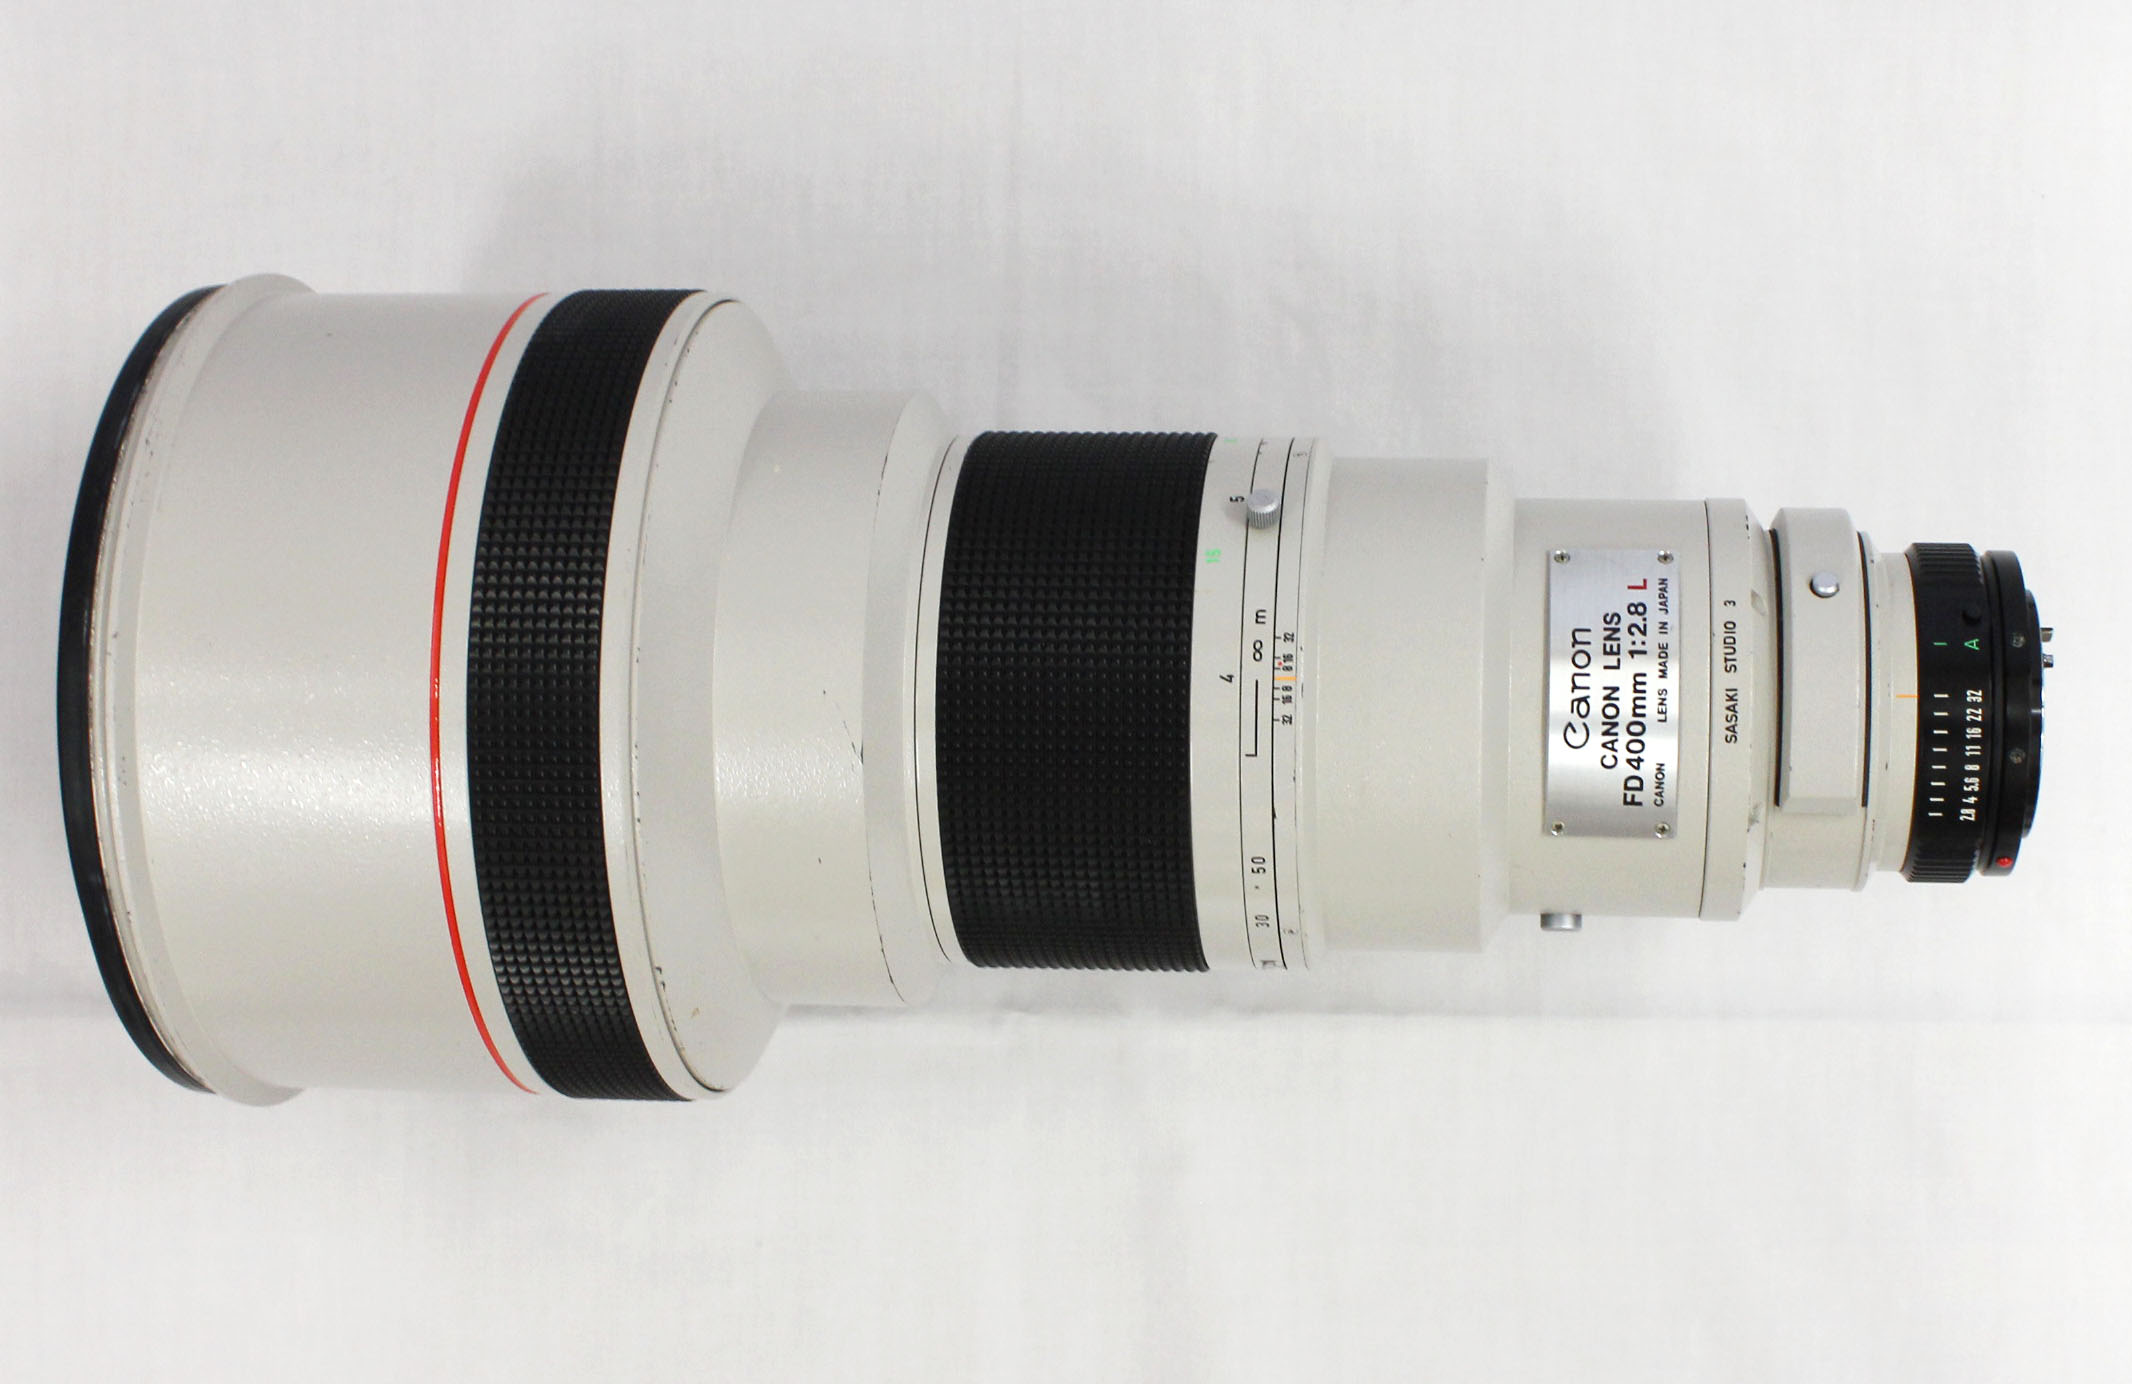  Canon New FD NFD 400mm F/2.8 L MF Telephoto Lens from Japan Photo 3